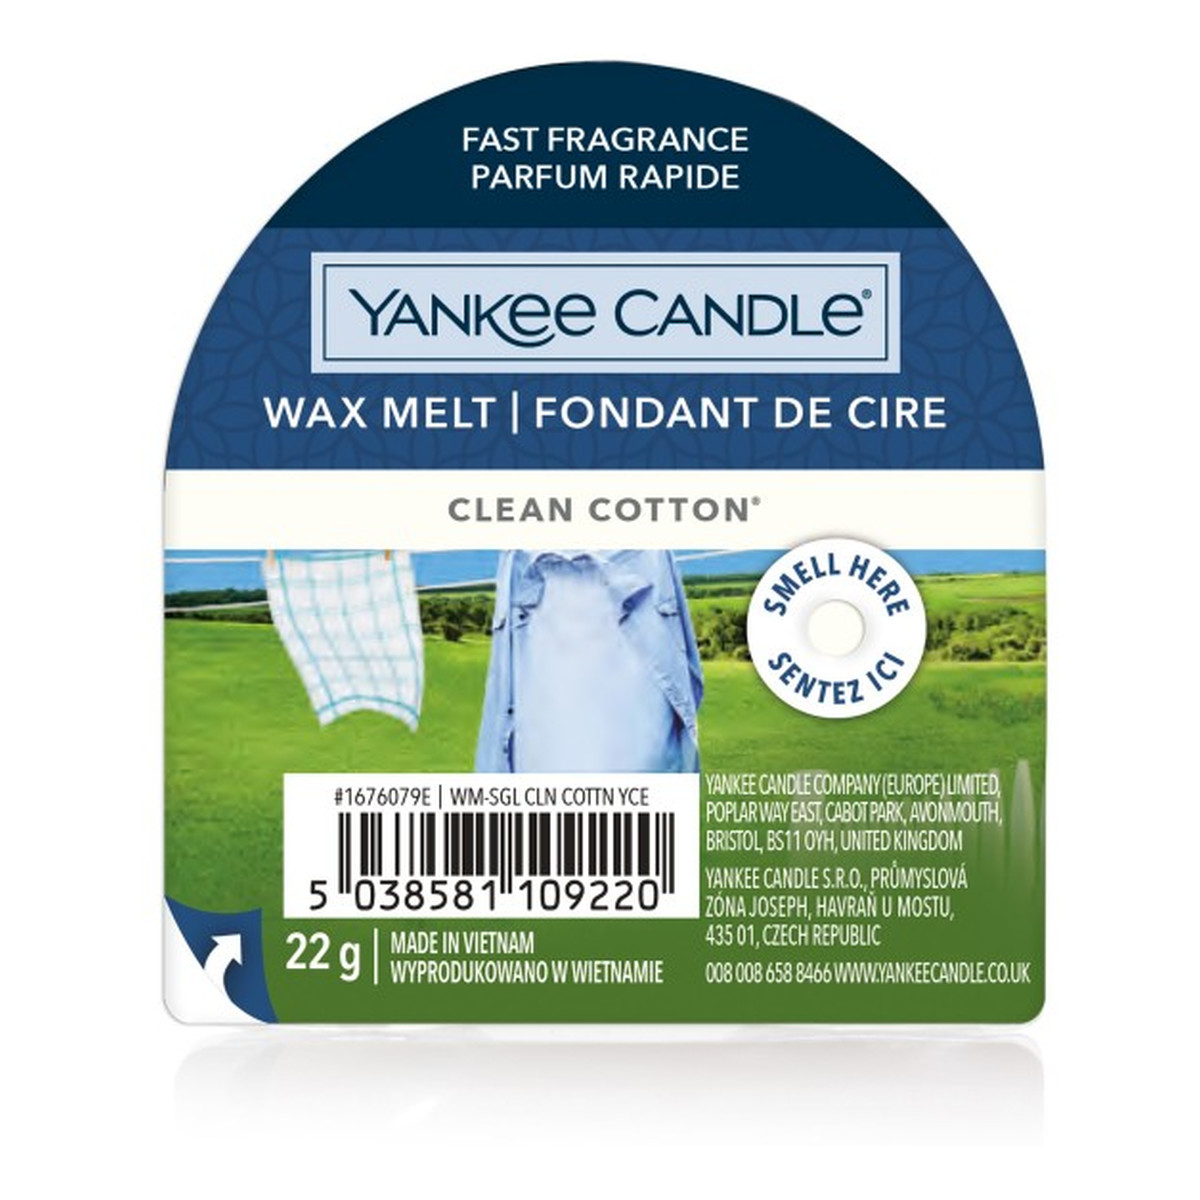 Yankee Candle Wax melt wosk zapachowy clean cotton 22g